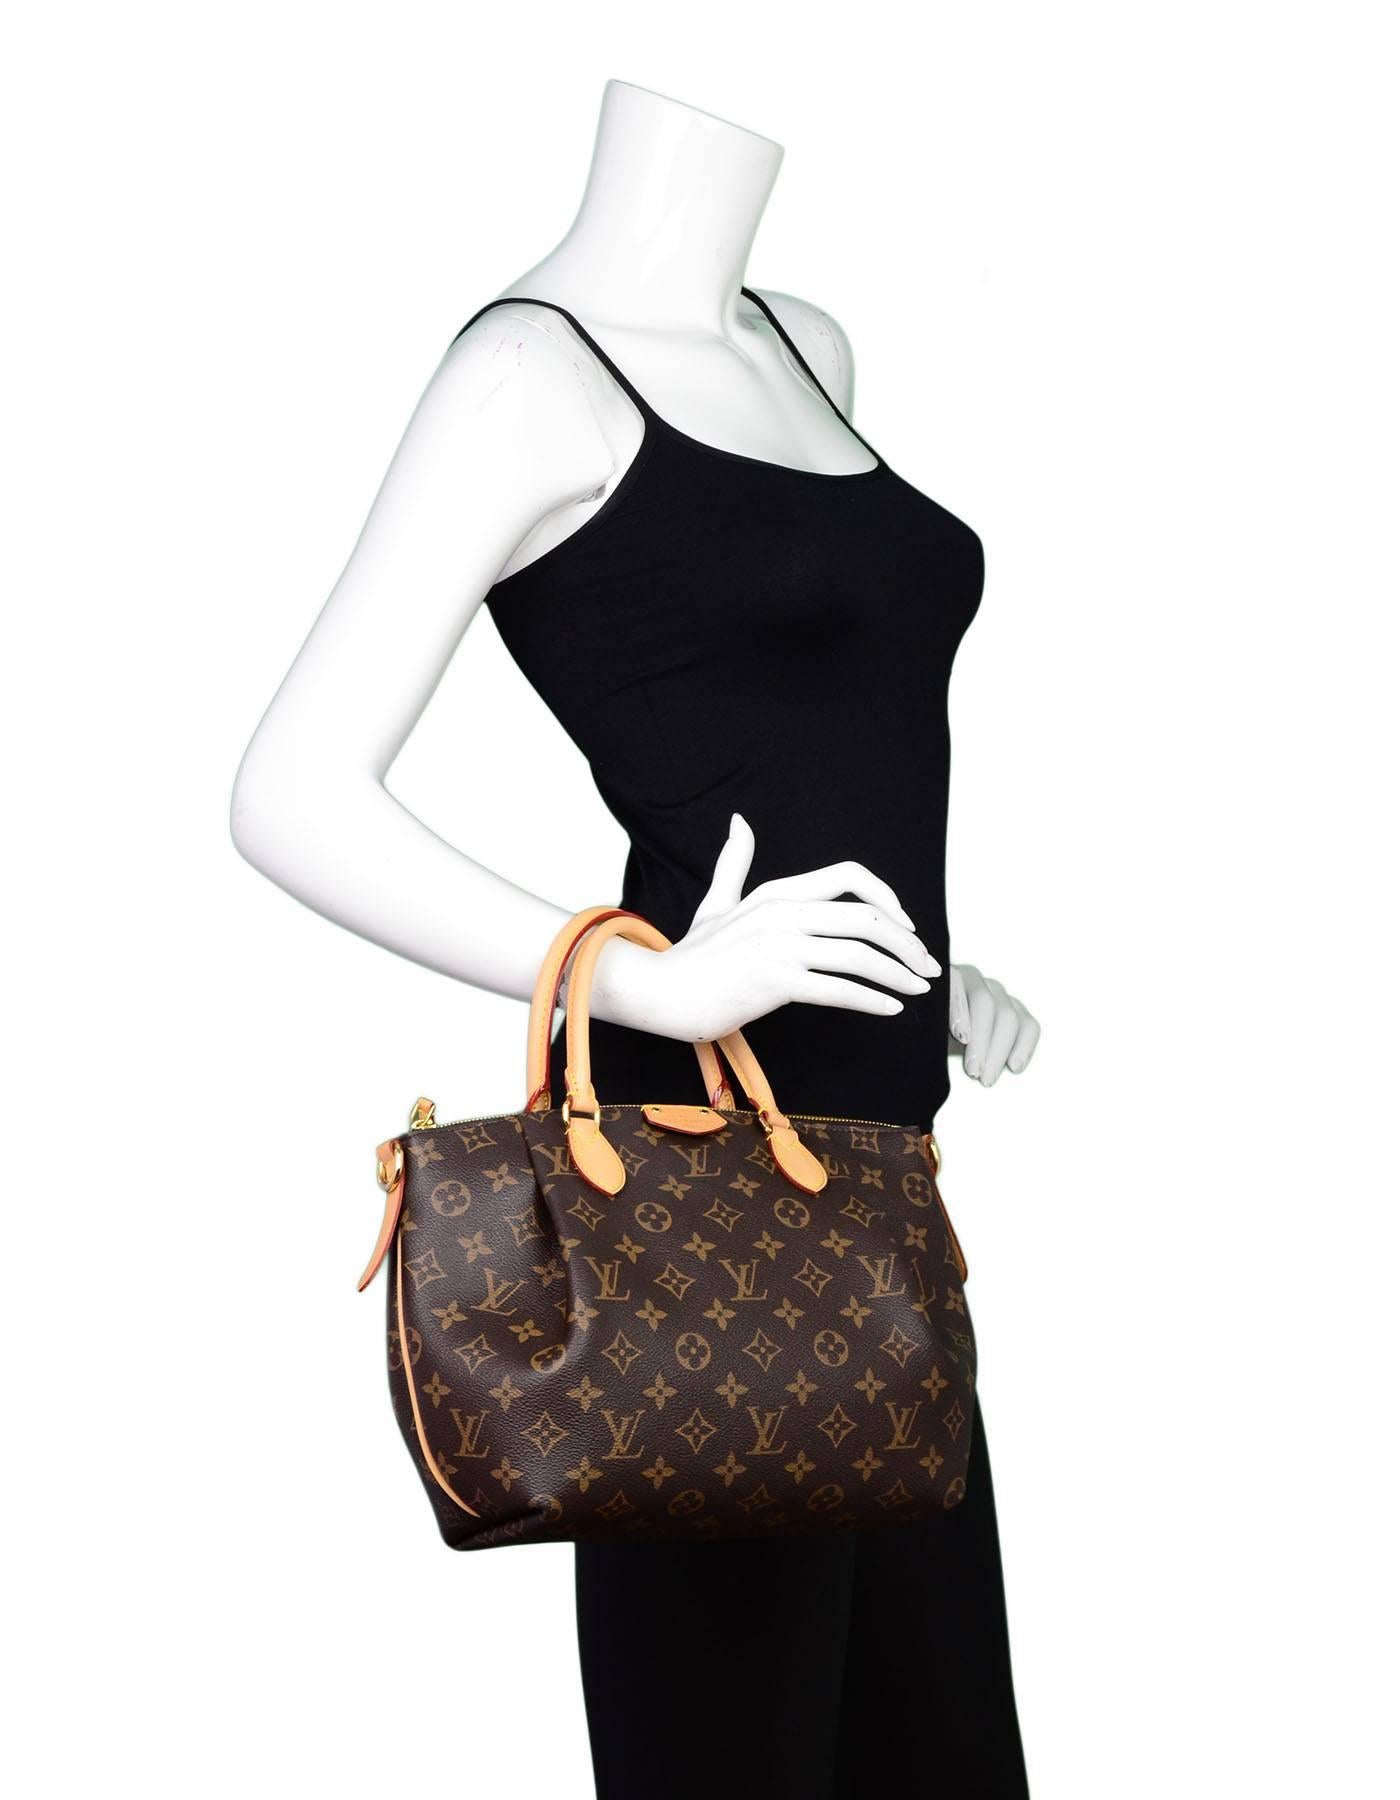 Louis Vuitton Monogram Turenne PM Bag

Made In: France
Year of Production: 2016
Color: Brown
Hardware: Goldtone
Materials: Coated canvas and vachetta leather
Lining: Burgundy canvas
Closure/Opening: Zip top
Exterior Pockets: None
Interior